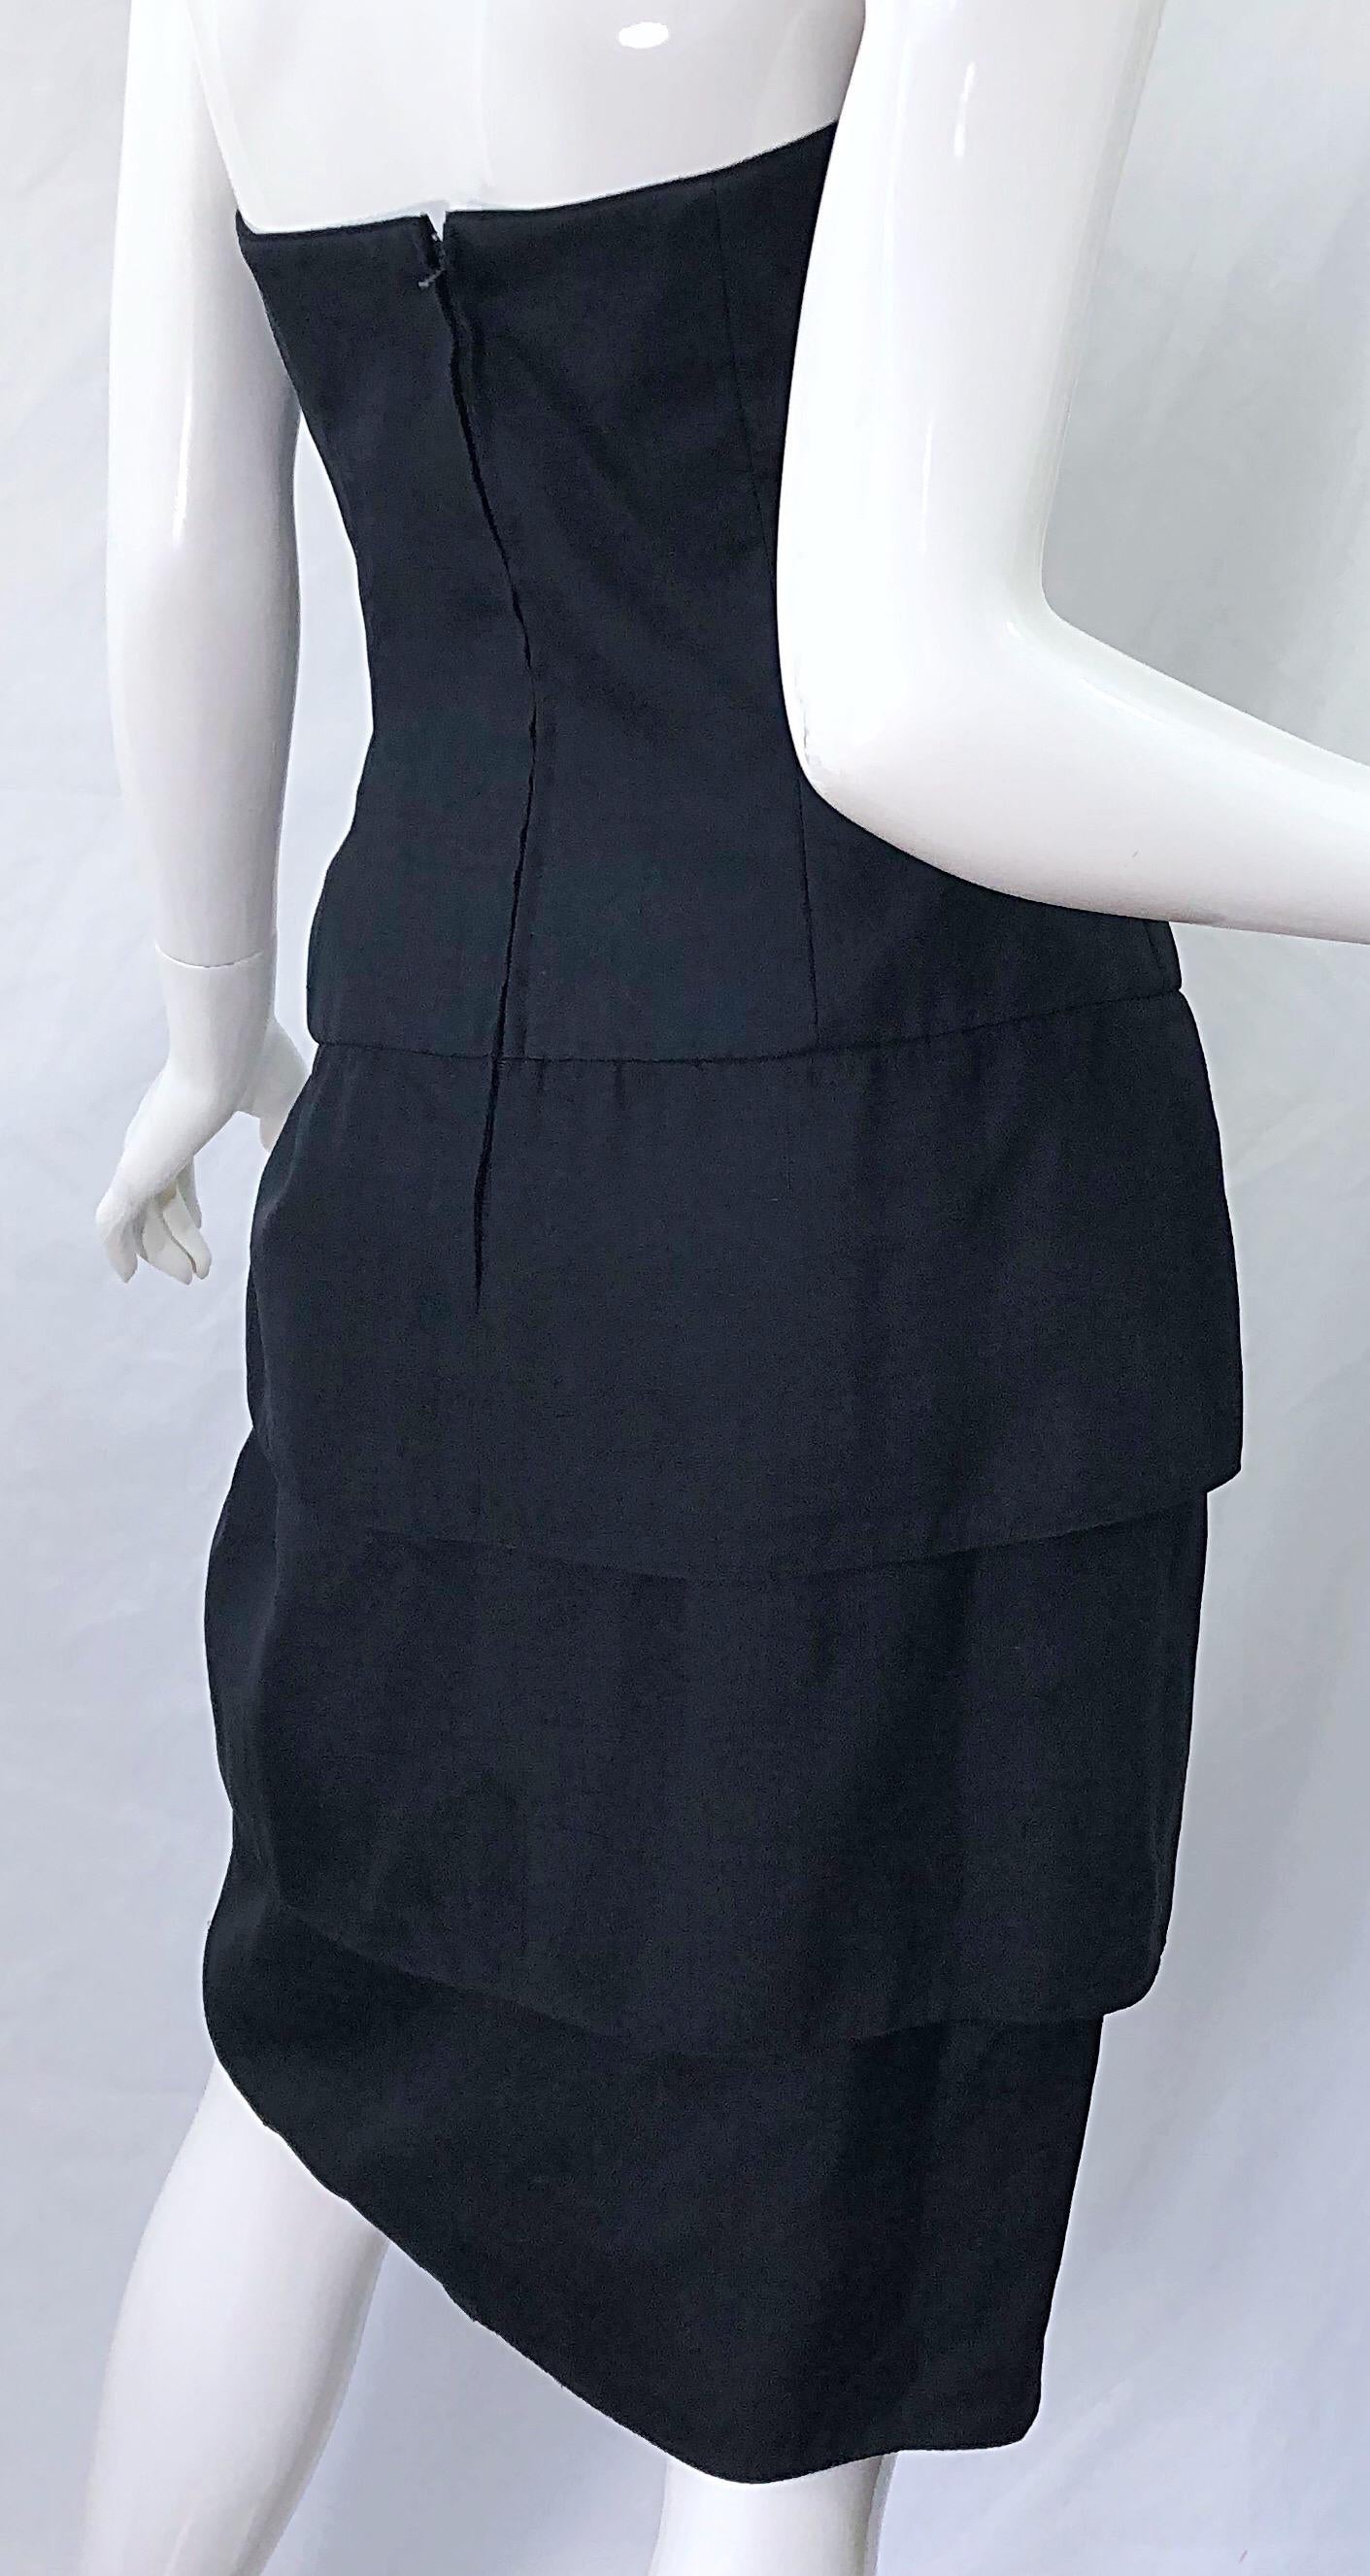 1980s A.J. Bari Lord & Taylor Size 10 / 12 Black Silk Strapless Cocktail Dress For Sale 2